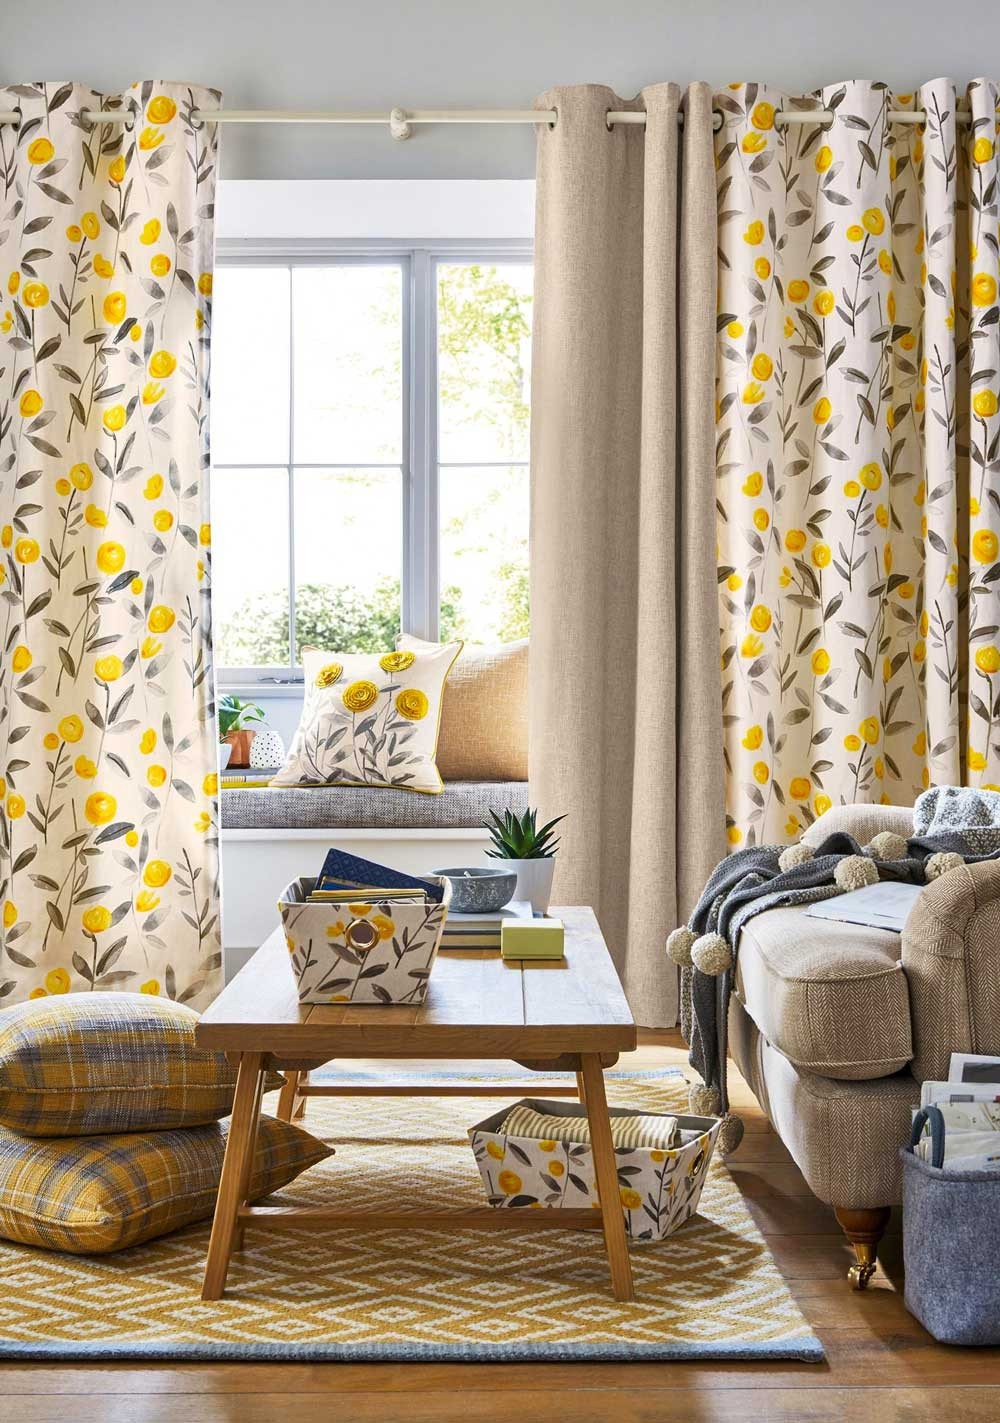 Pretty Curtains For Living Room
 30 Beautiful Living Room Curtain Ideas and Patterns